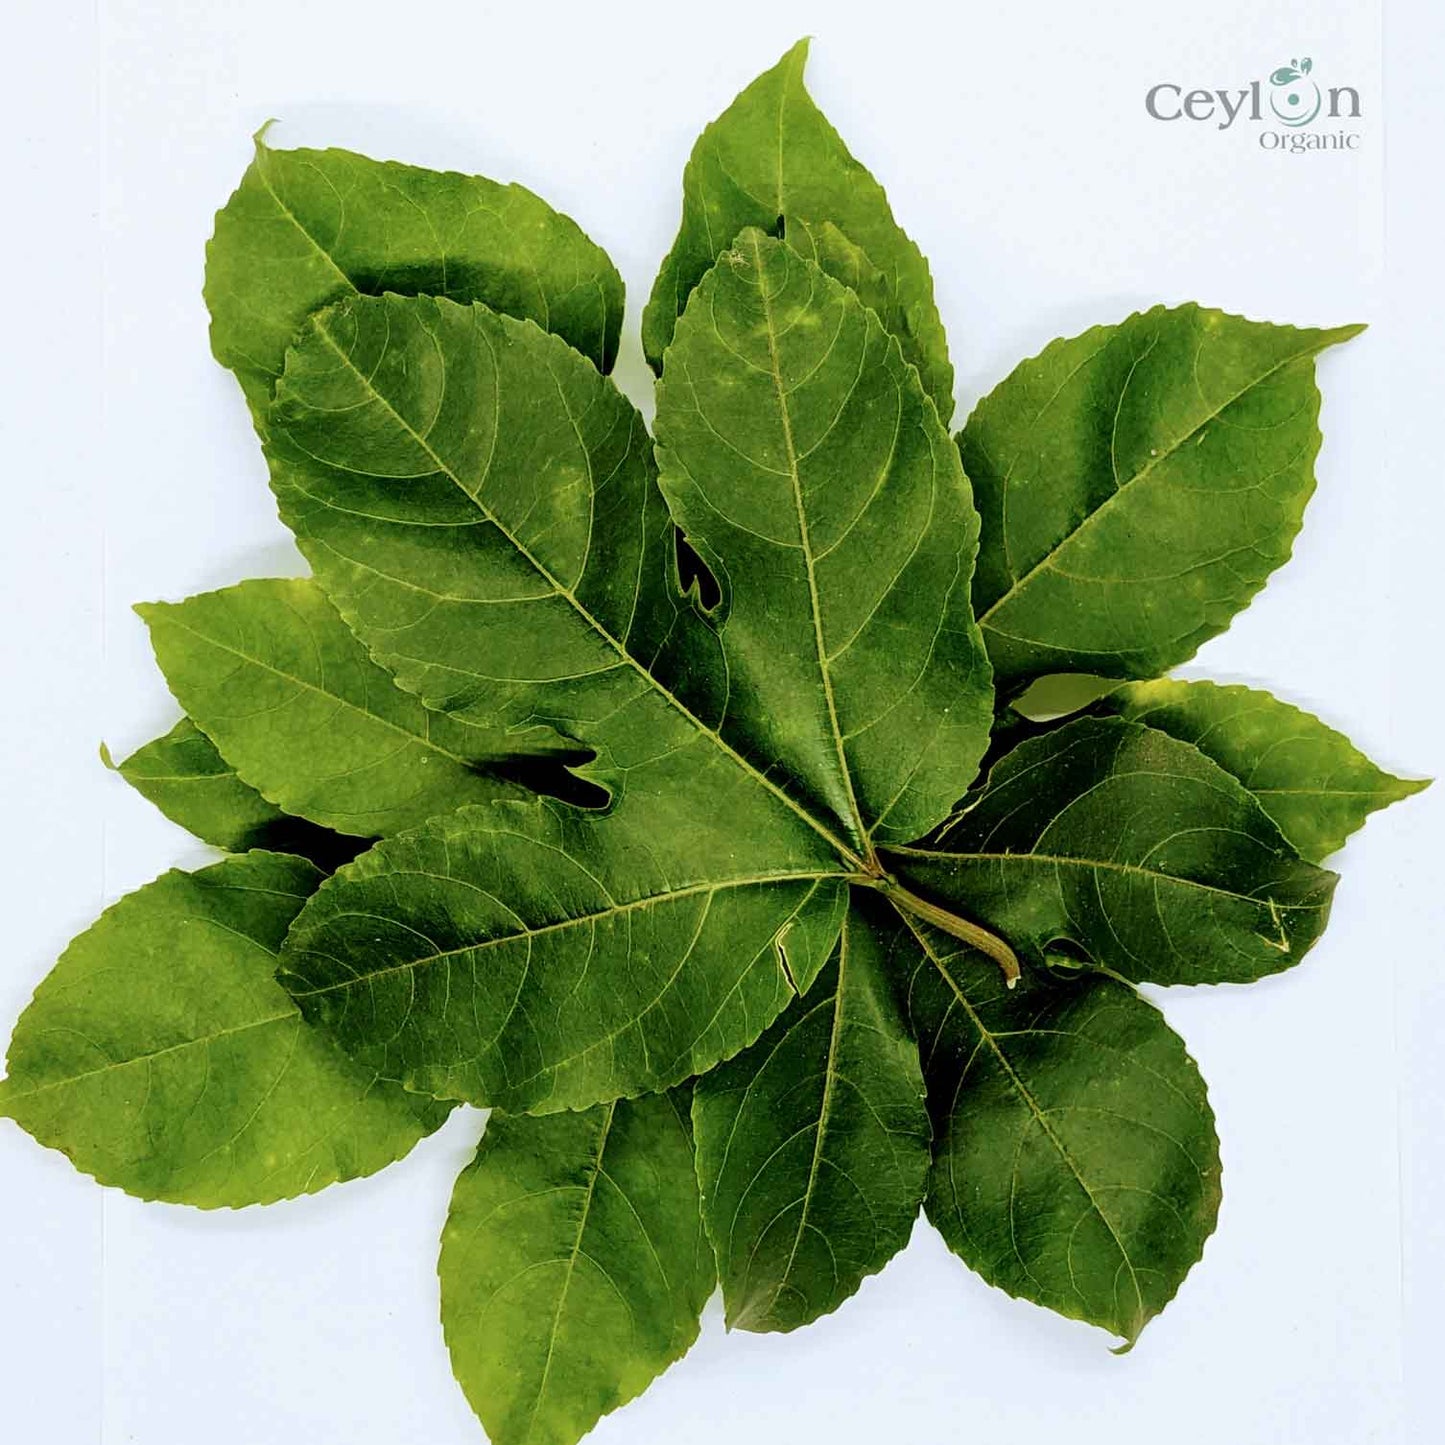 500+ Passion Fruit,Dried Passion Fruit Leaves,Dried Natural Passion Fruit Leaves | Ceylon organic-2